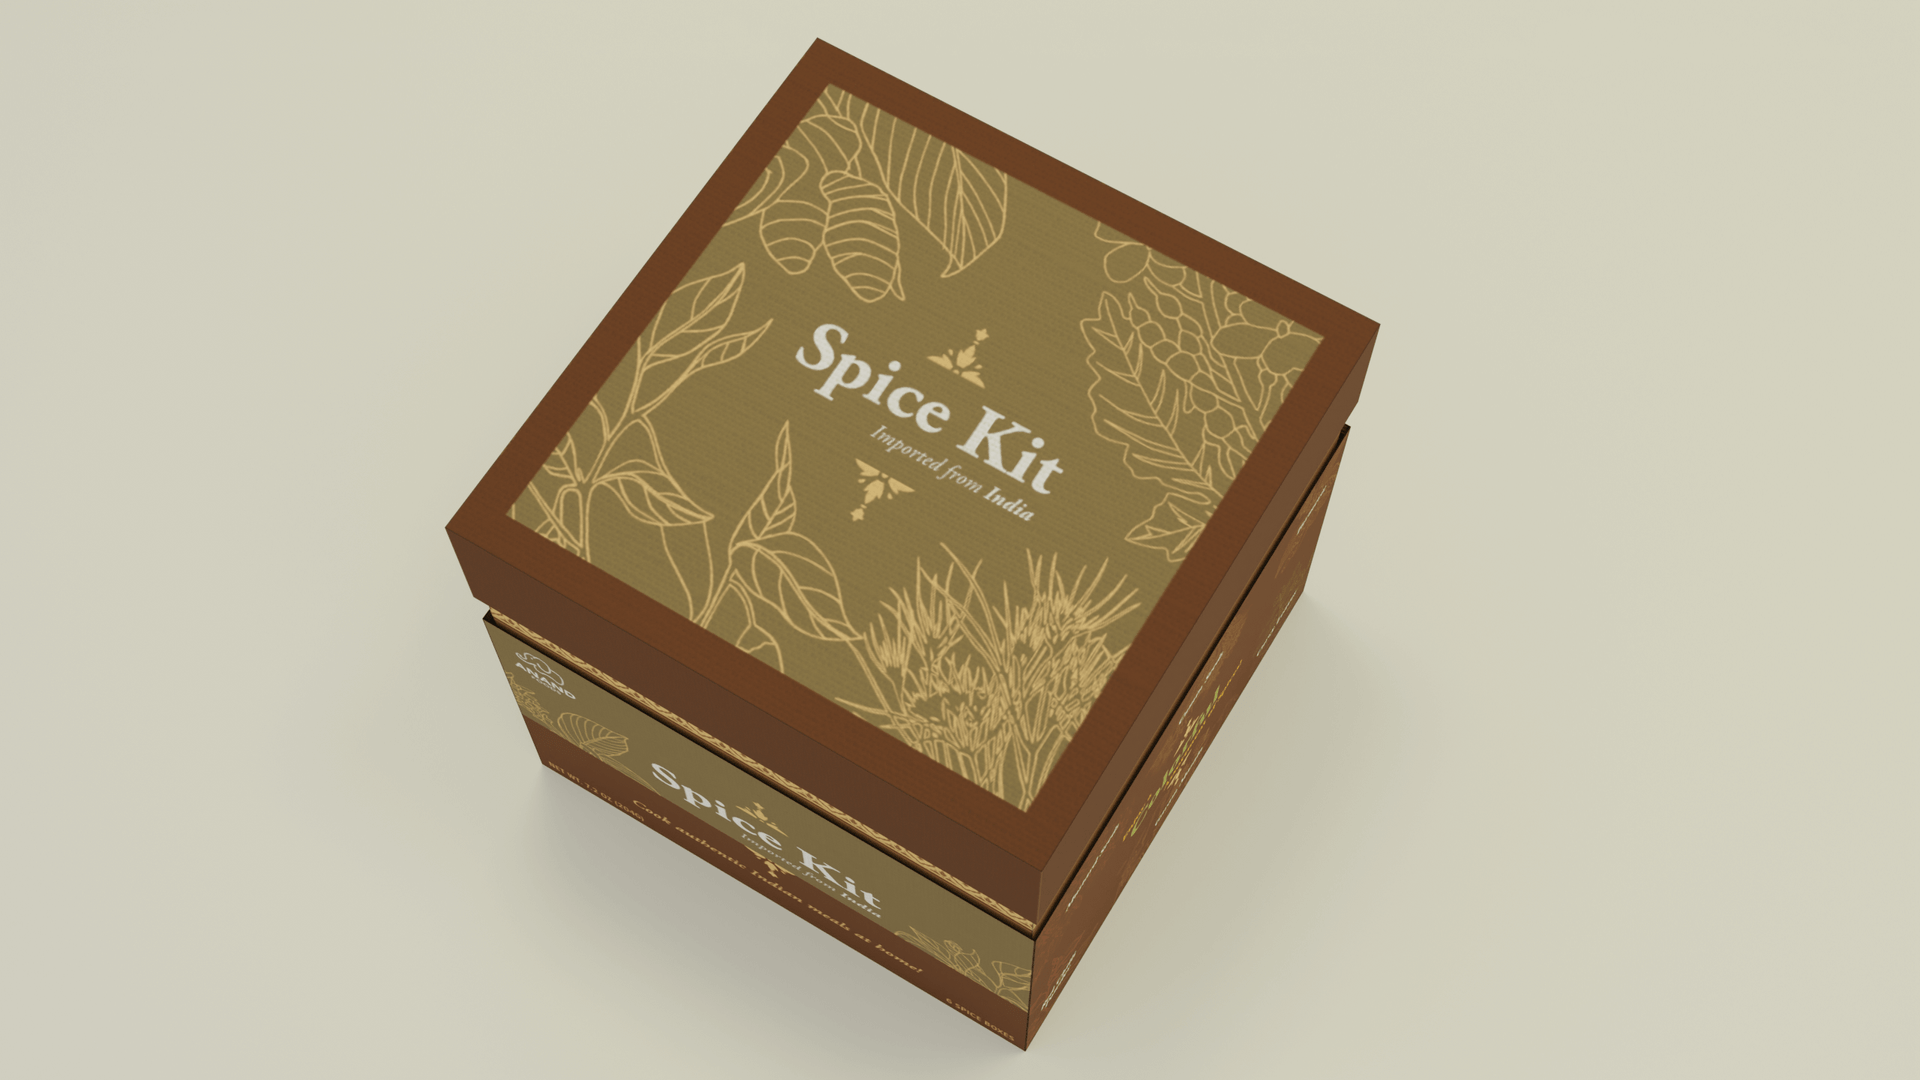 Indian Spice Kit Packaging